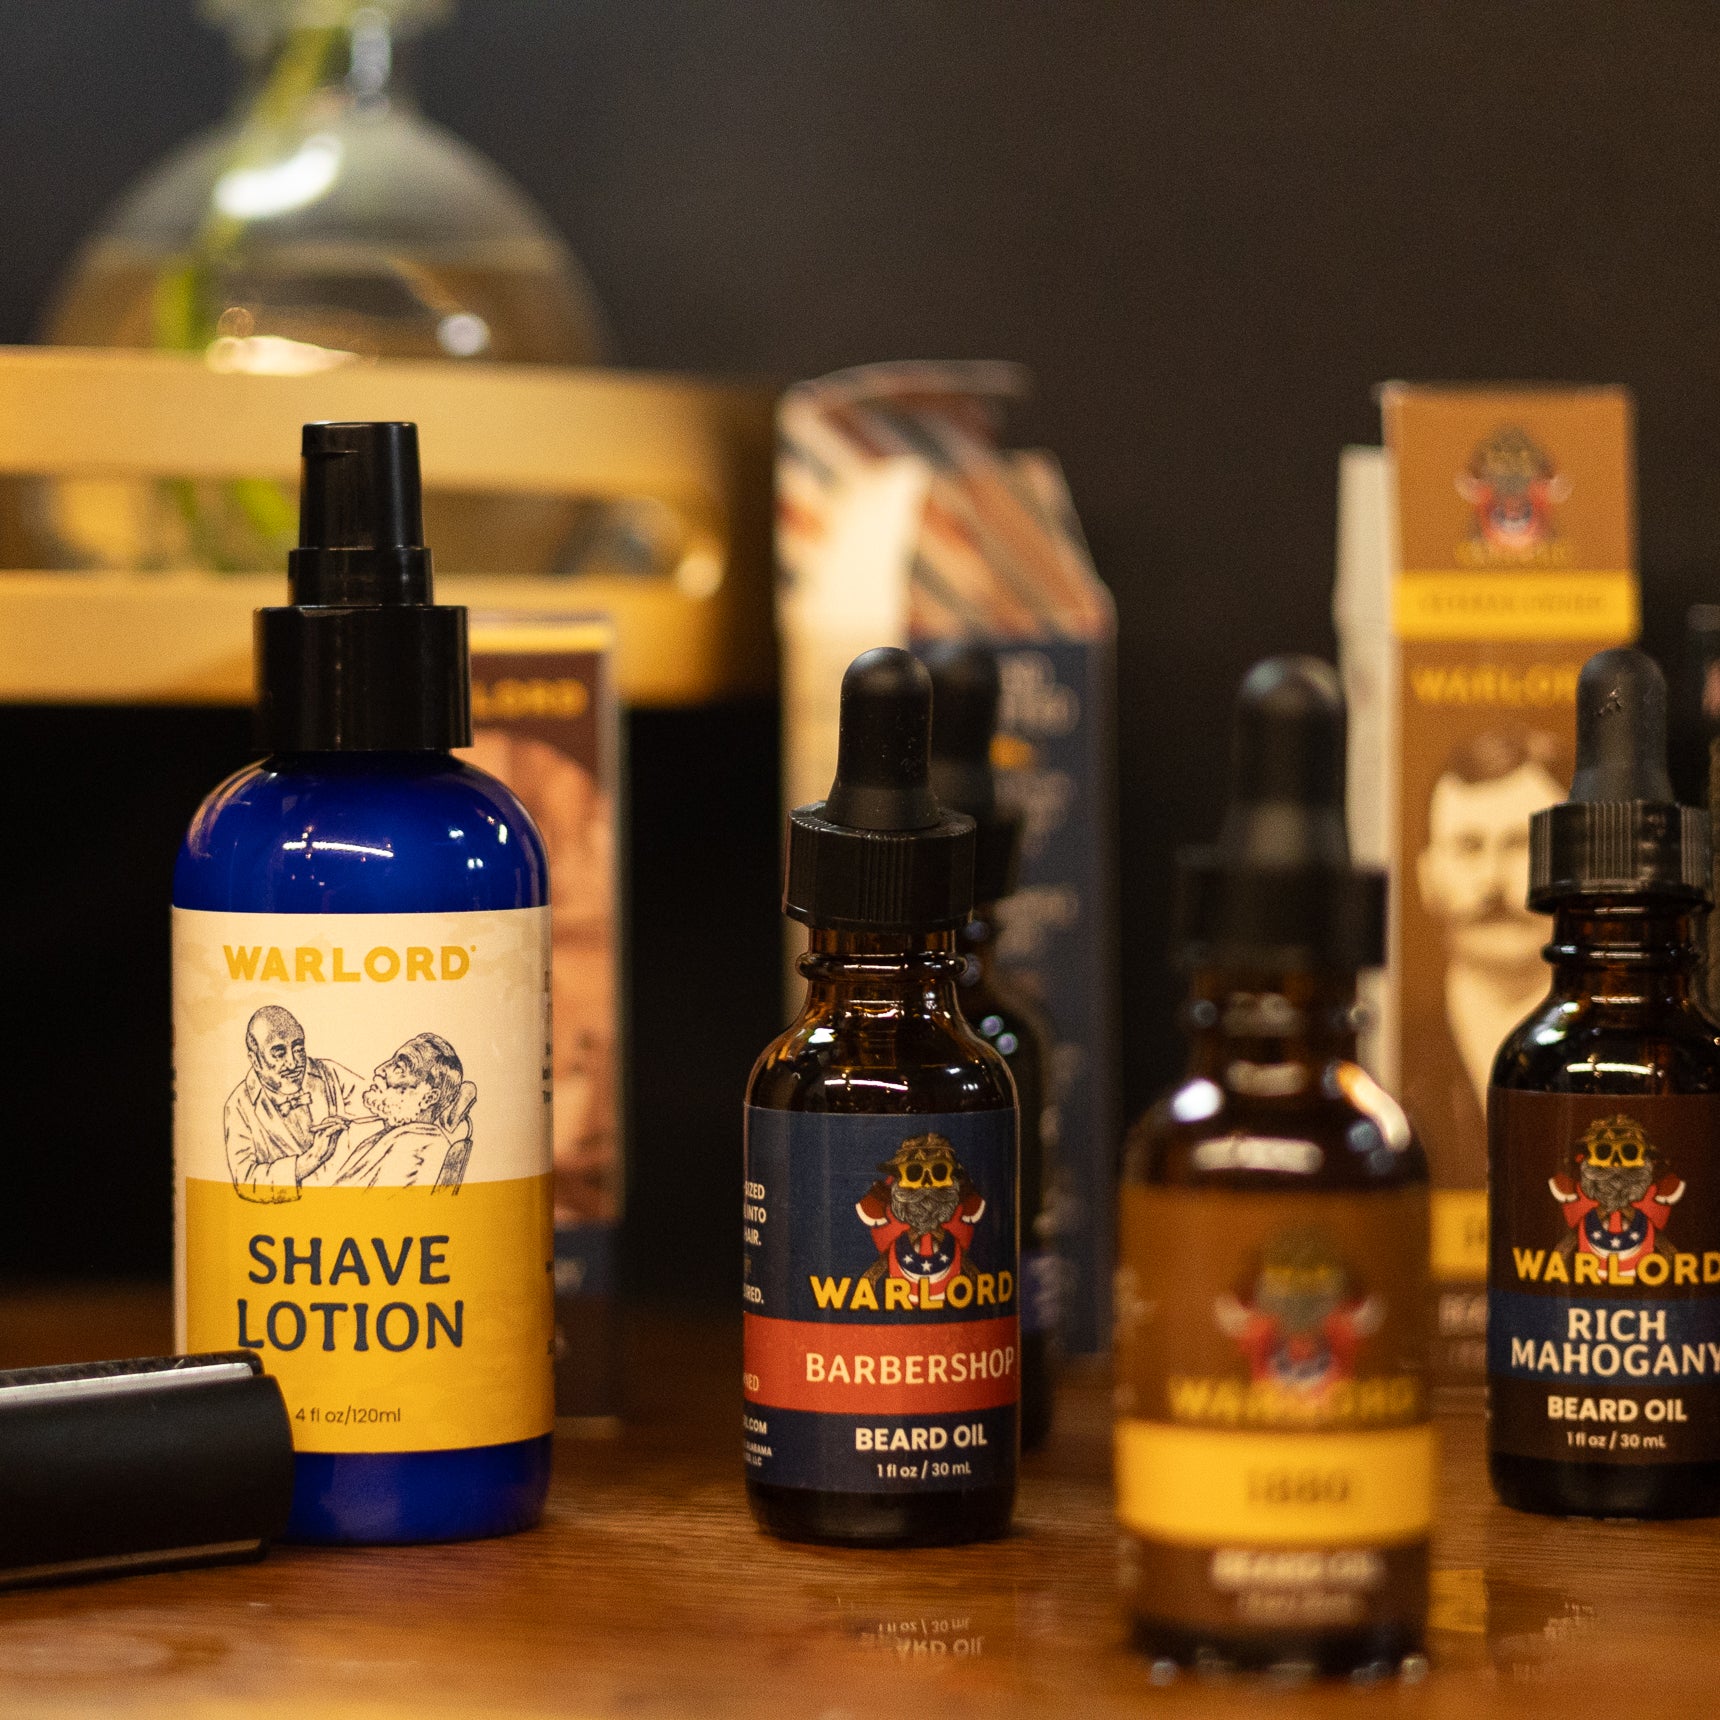 Warlord Shaving Lotion and Warlord Beard Oils displayed on a vintage countertop alongside an old-fashioned double-edge safety razor.